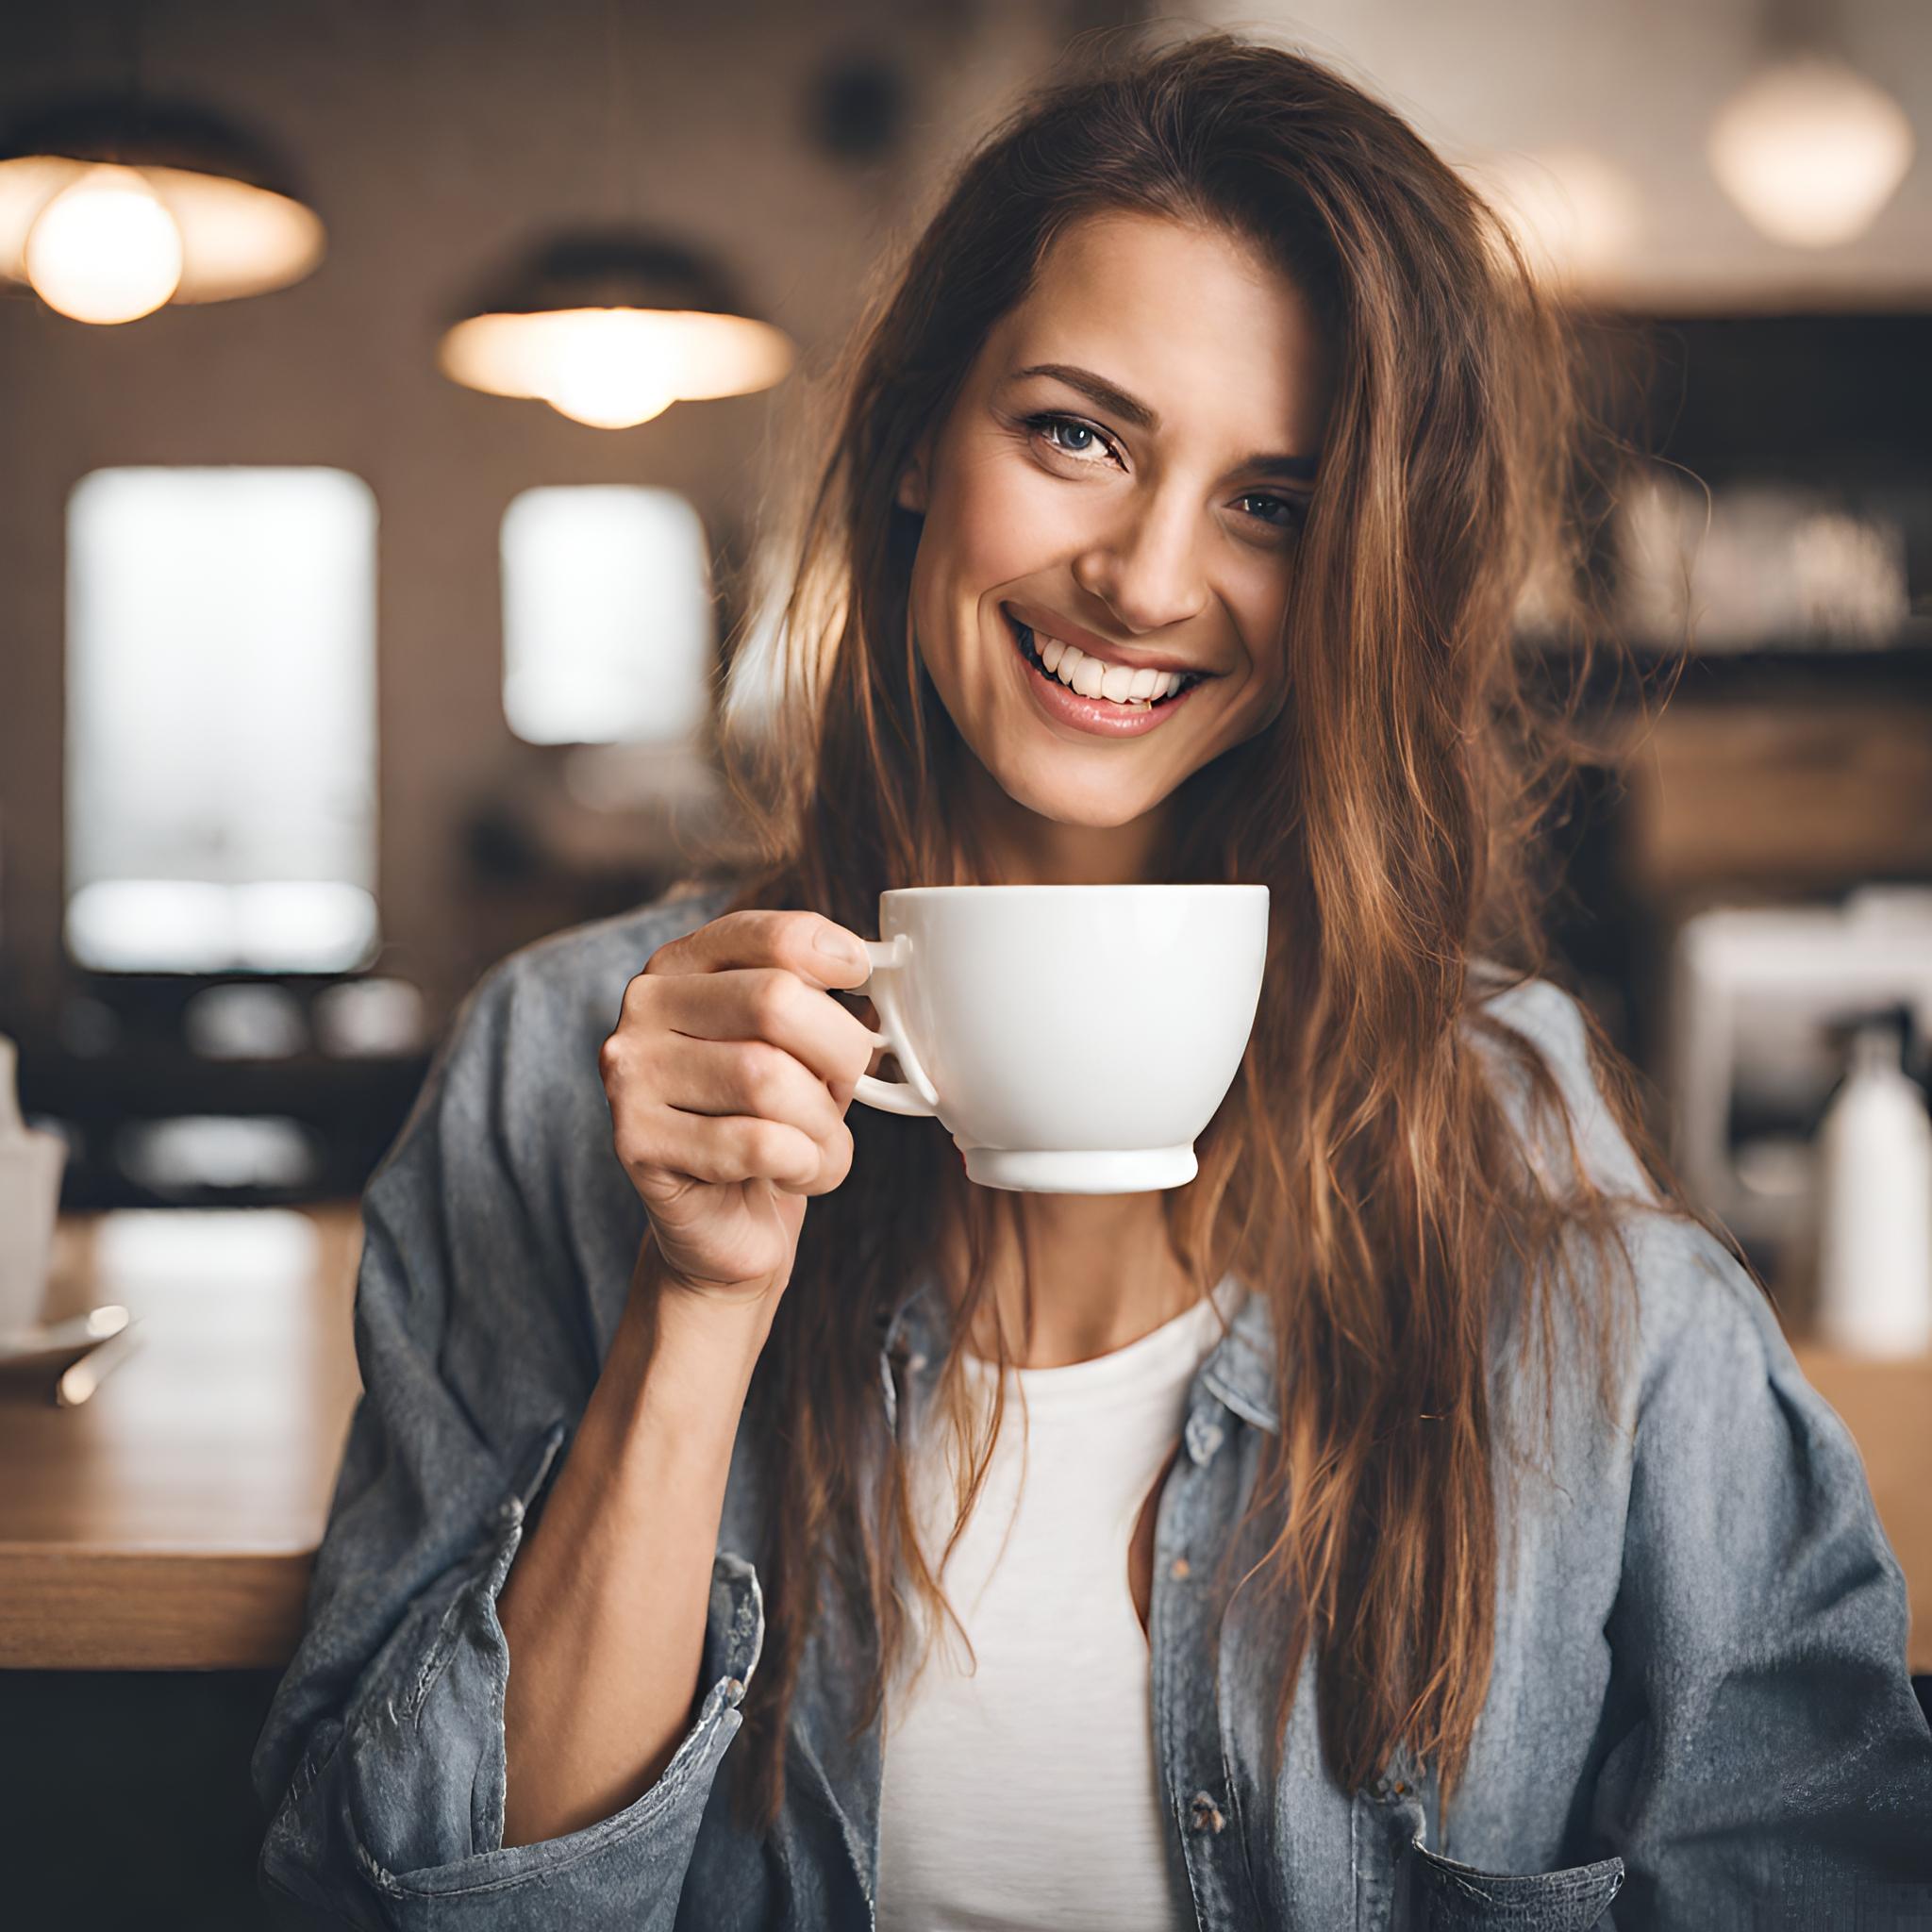 A woman enjoying a good cup of coffee in a cafe.